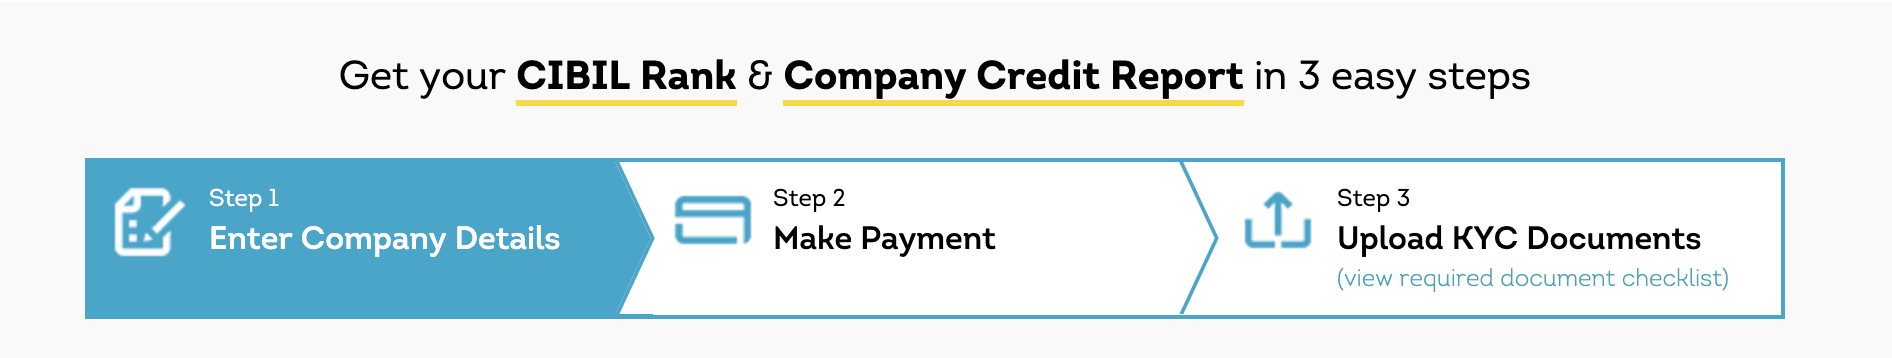 Get your CIBIL Rank & Company Credit Report in 3 easy steps